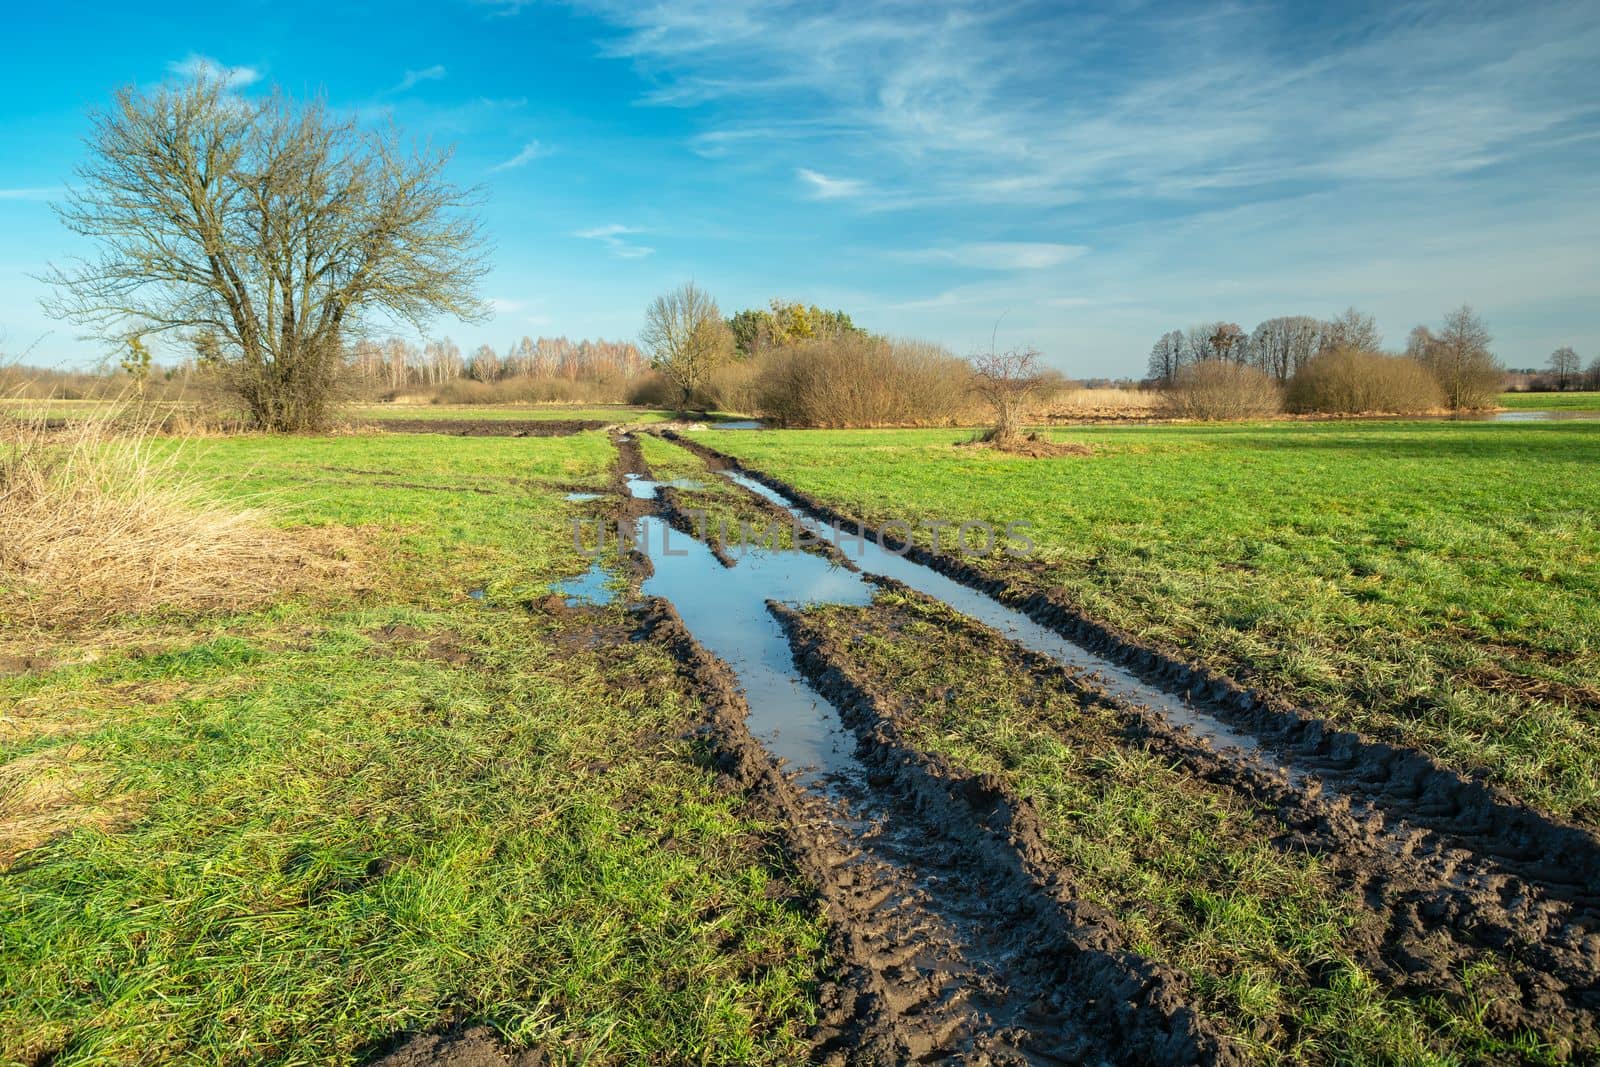 Water on a muddy rural road through a green meadow, Nowiny, Lubelskie, eastern Poland